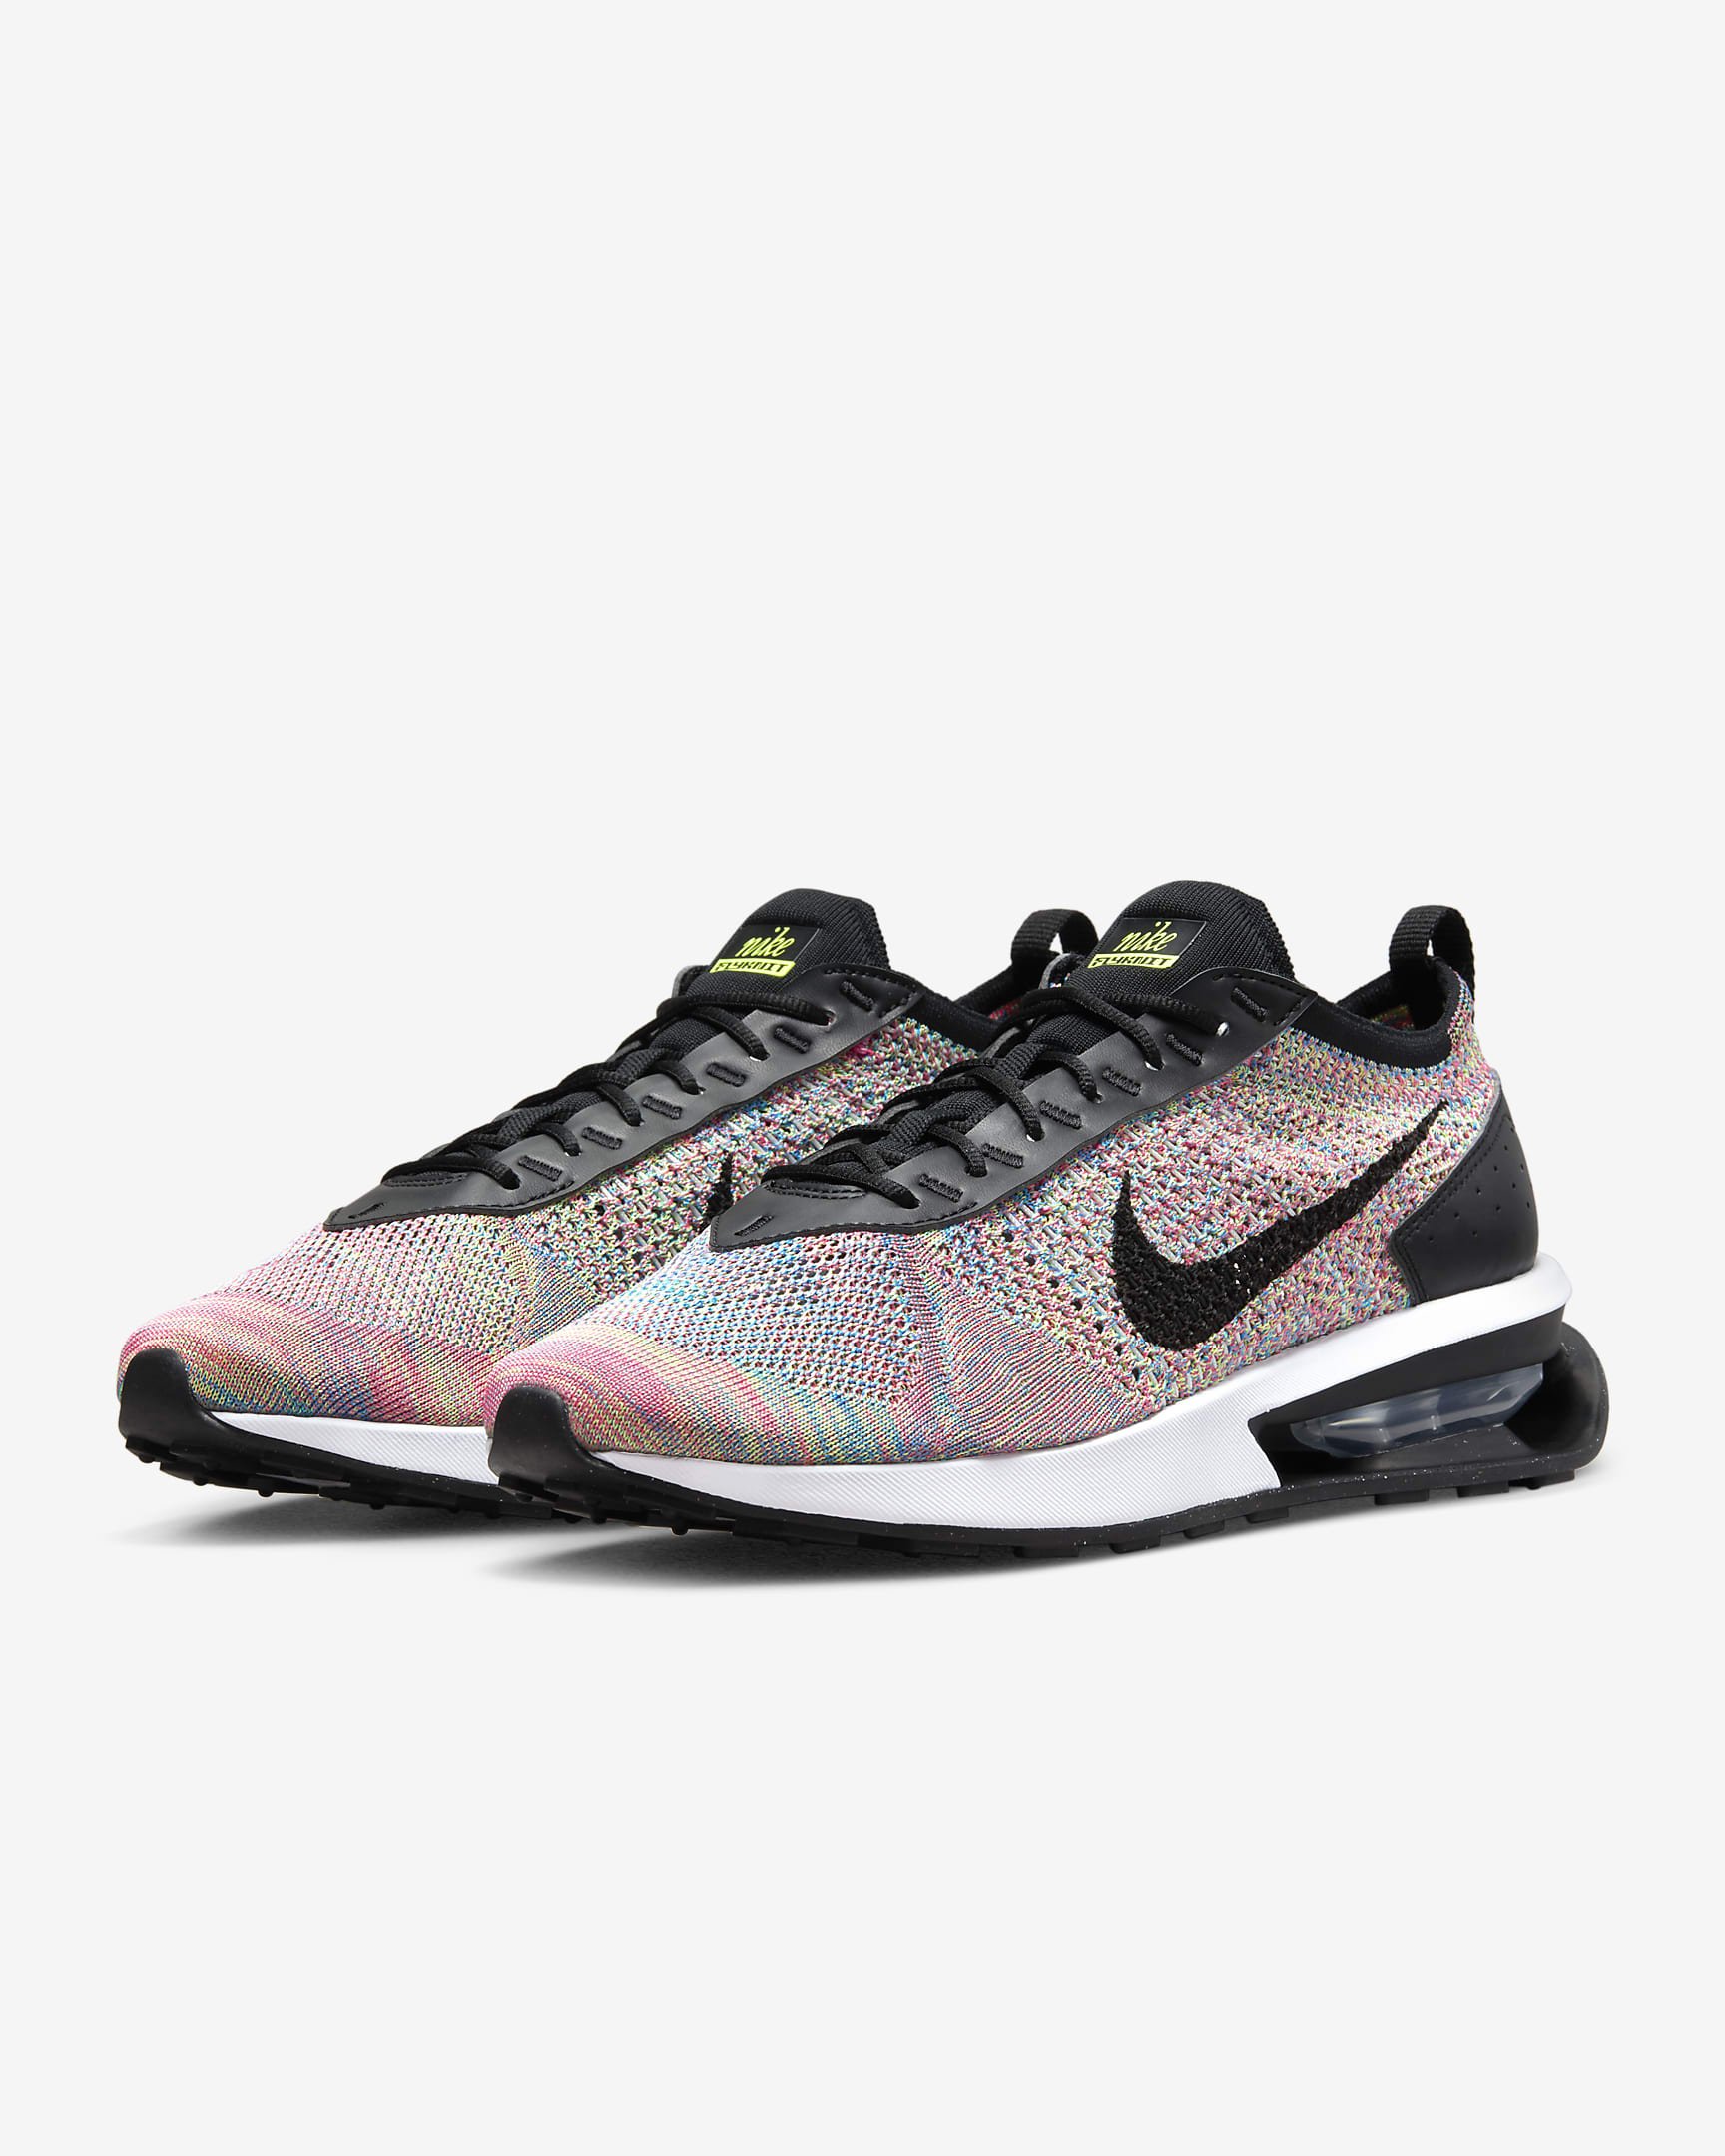 Nike Air Max Flyknit Racer Men's Shoes (Ghost Green/Pink Blast/Photo Blue/Black)